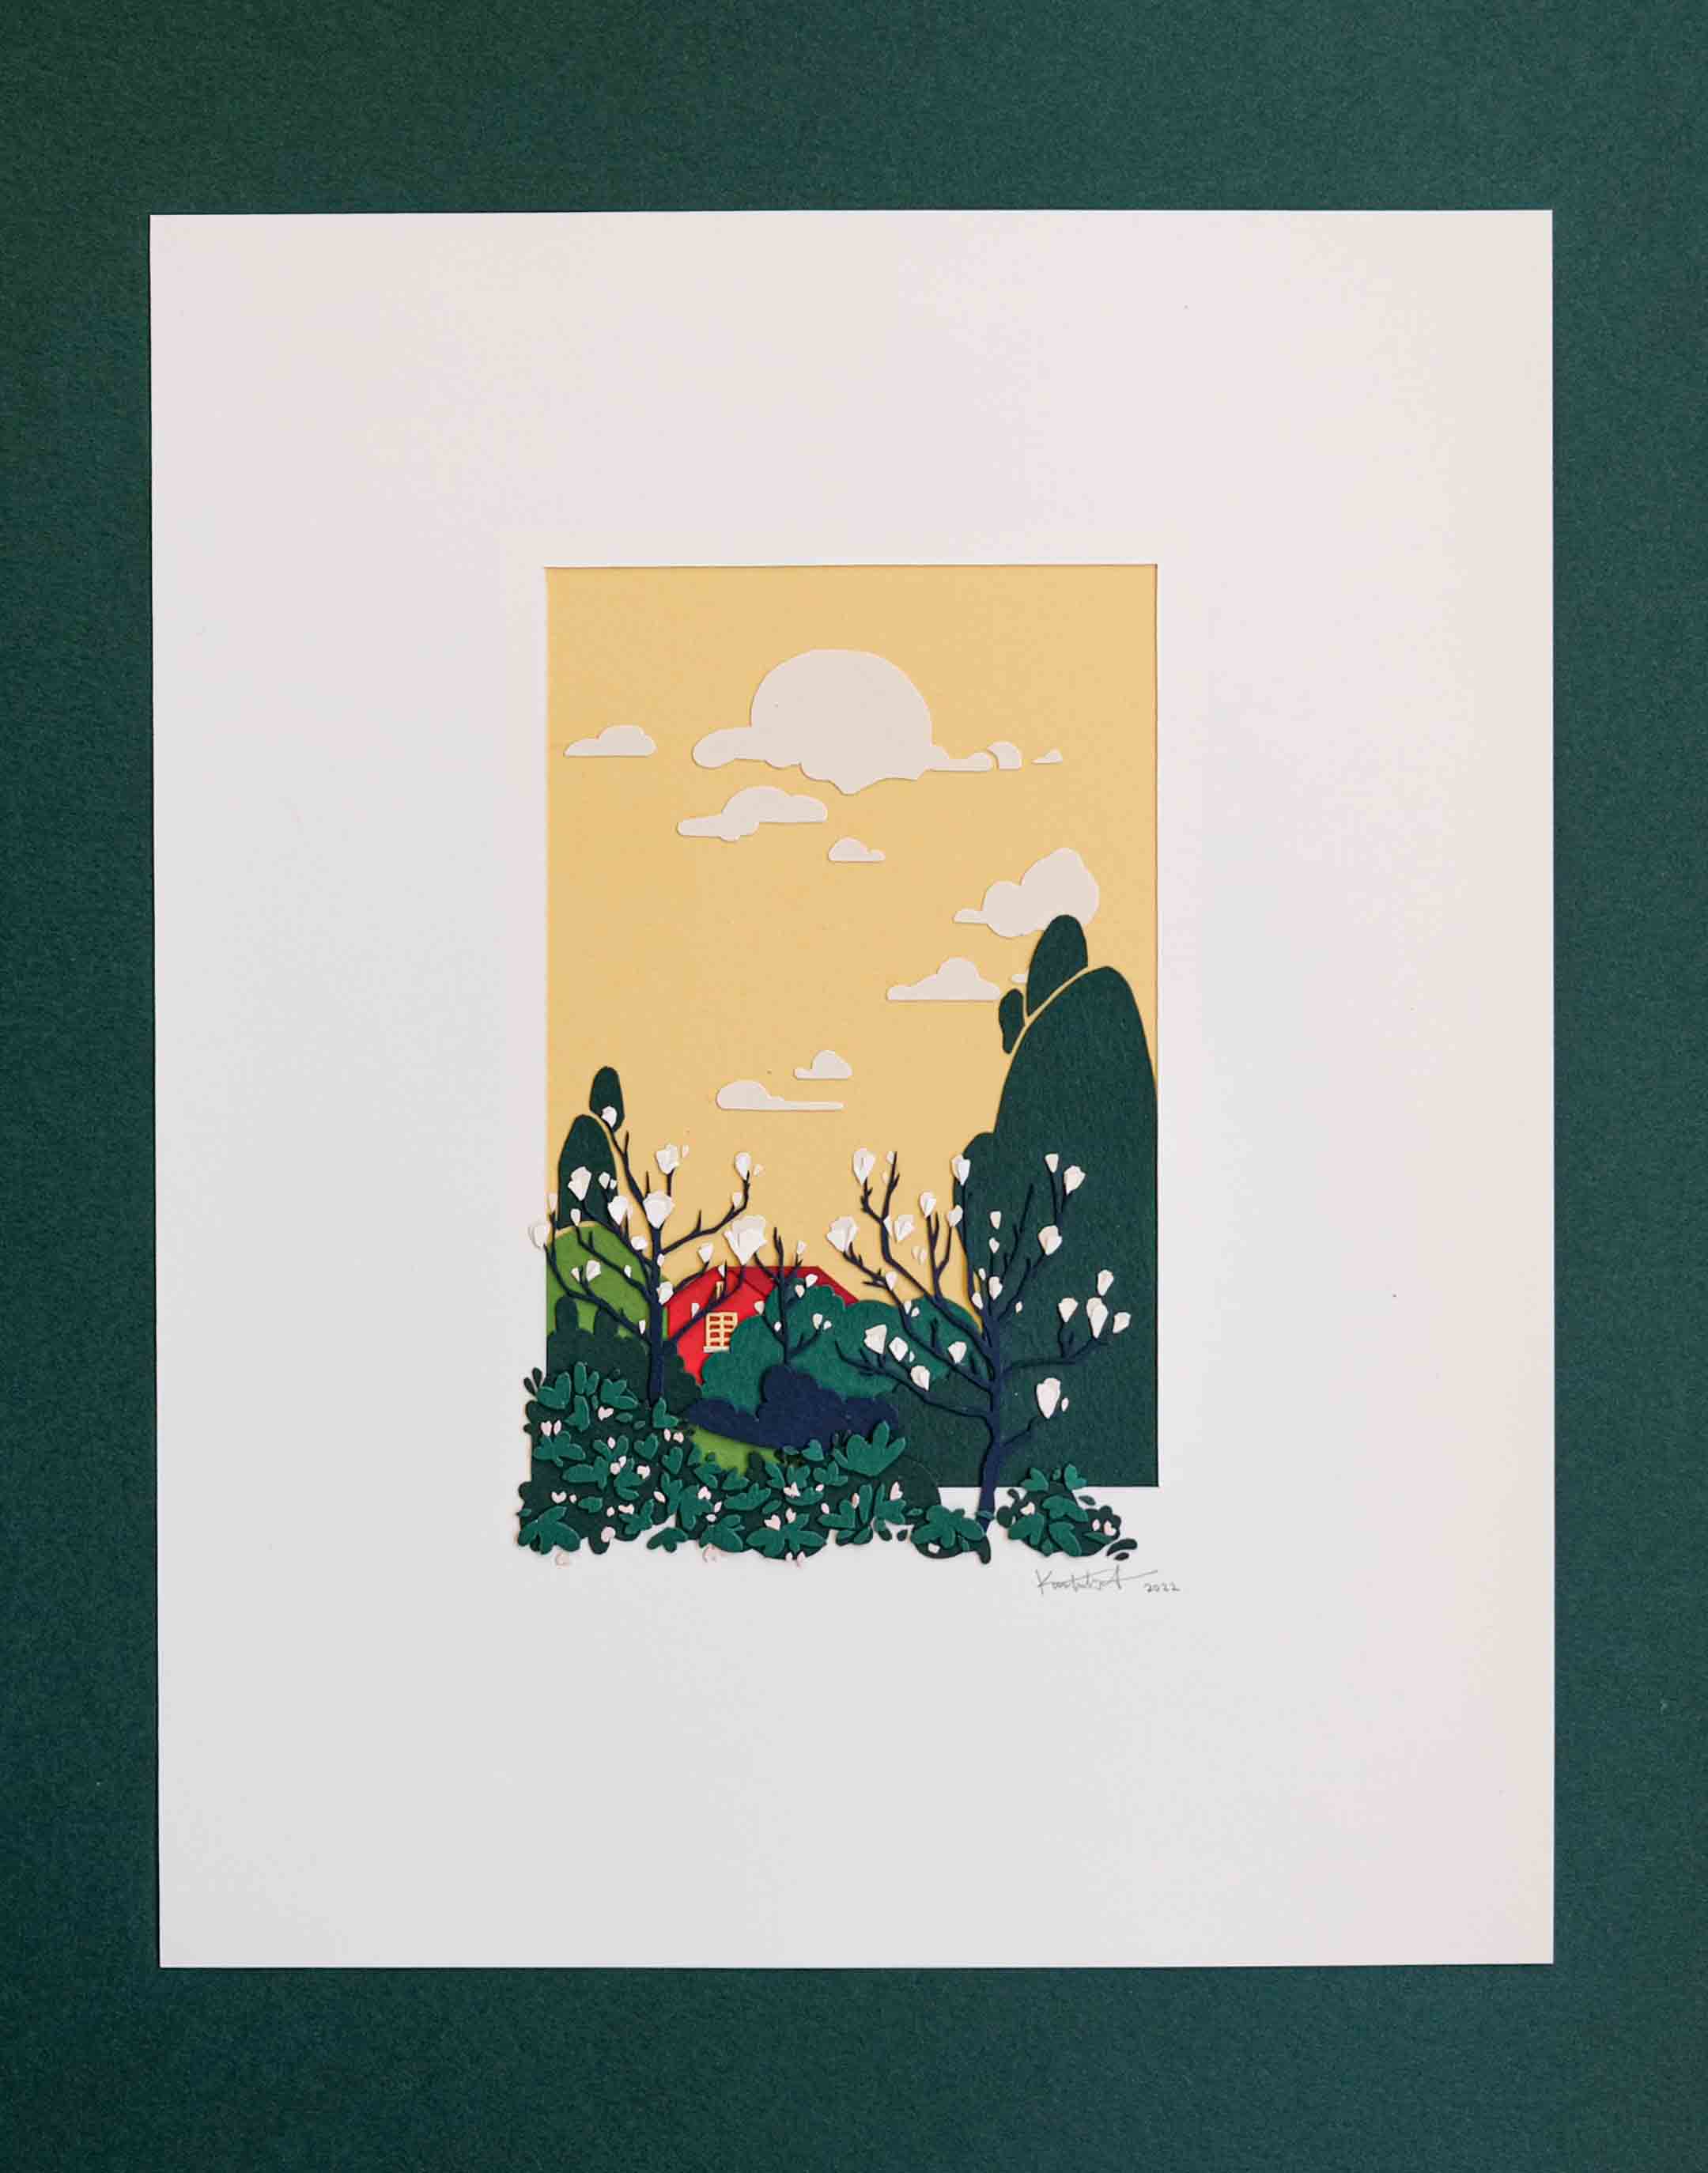 Layers of cut paper depict a red house against a warm yellow sky, behind a grove of magnolia blossoms and other trees. It sits in a white mat, with some of the trees and plants spilling out of the mat opening. A dark green background is visible behind the artwork.